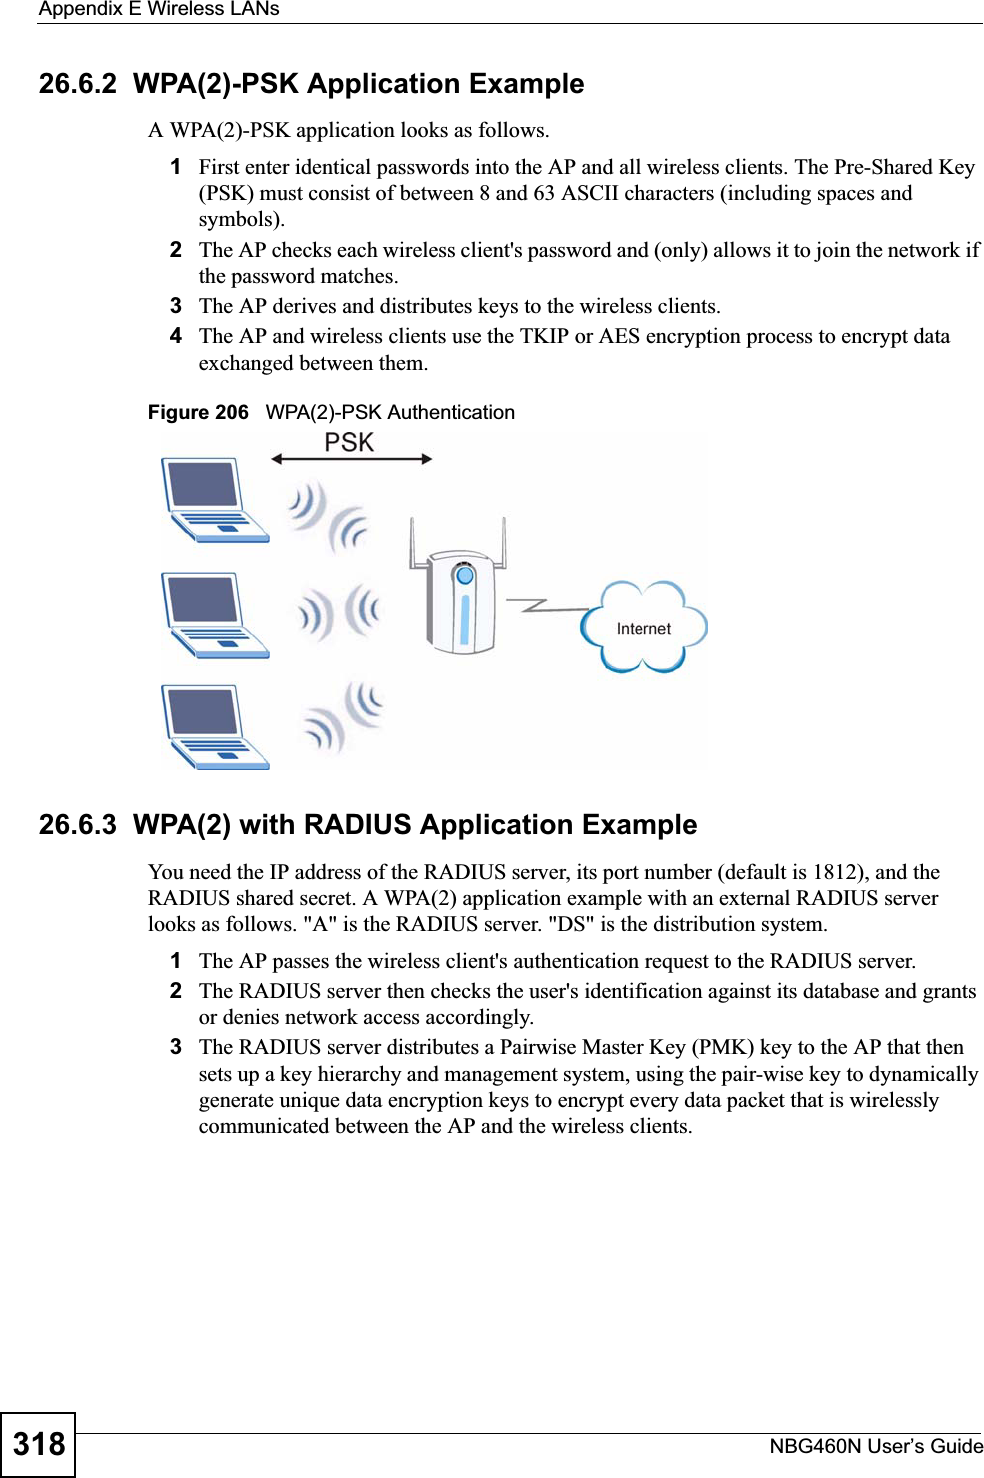 Appendix E Wireless LANsNBG460N User’s Guide31826.6.2  WPA(2)-PSK Application ExampleA WPA(2)-PSK application looks as follows.1First enter identical passwords into the AP and all wireless clients. The Pre-Shared Key (PSK) must consist of between 8 and 63 ASCII characters (including spaces and symbols).2The AP checks each wireless client&apos;s password and (only) allows it to join the network if the password matches.3The AP derives and distributes keys to the wireless clients.4The AP and wireless clients use the TKIP or AES encryption process to encrypt data exchanged between them.Figure 206   WPA(2)-PSK Authentication26.6.3  WPA(2) with RADIUS Application ExampleYou need the IP address of the RADIUS server, its port number (default is 1812), and the RADIUS shared secret. A WPA(2) application example with an external RADIUS server looks as follows. &quot;A&quot; is the RADIUS server. &quot;DS&quot; is the distribution system.1The AP passes the wireless client&apos;s authentication request to the RADIUS server.2The RADIUS server then checks the user&apos;s identification against its database and grants or denies network access accordingly.3The RADIUS server distributes a Pairwise Master Key (PMK) key to the AP that then sets up a key hierarchy and management system, using the pair-wise key to dynamically generate unique data encryption keys to encrypt every data packet that is wirelessly communicated between the AP and the wireless clients. 